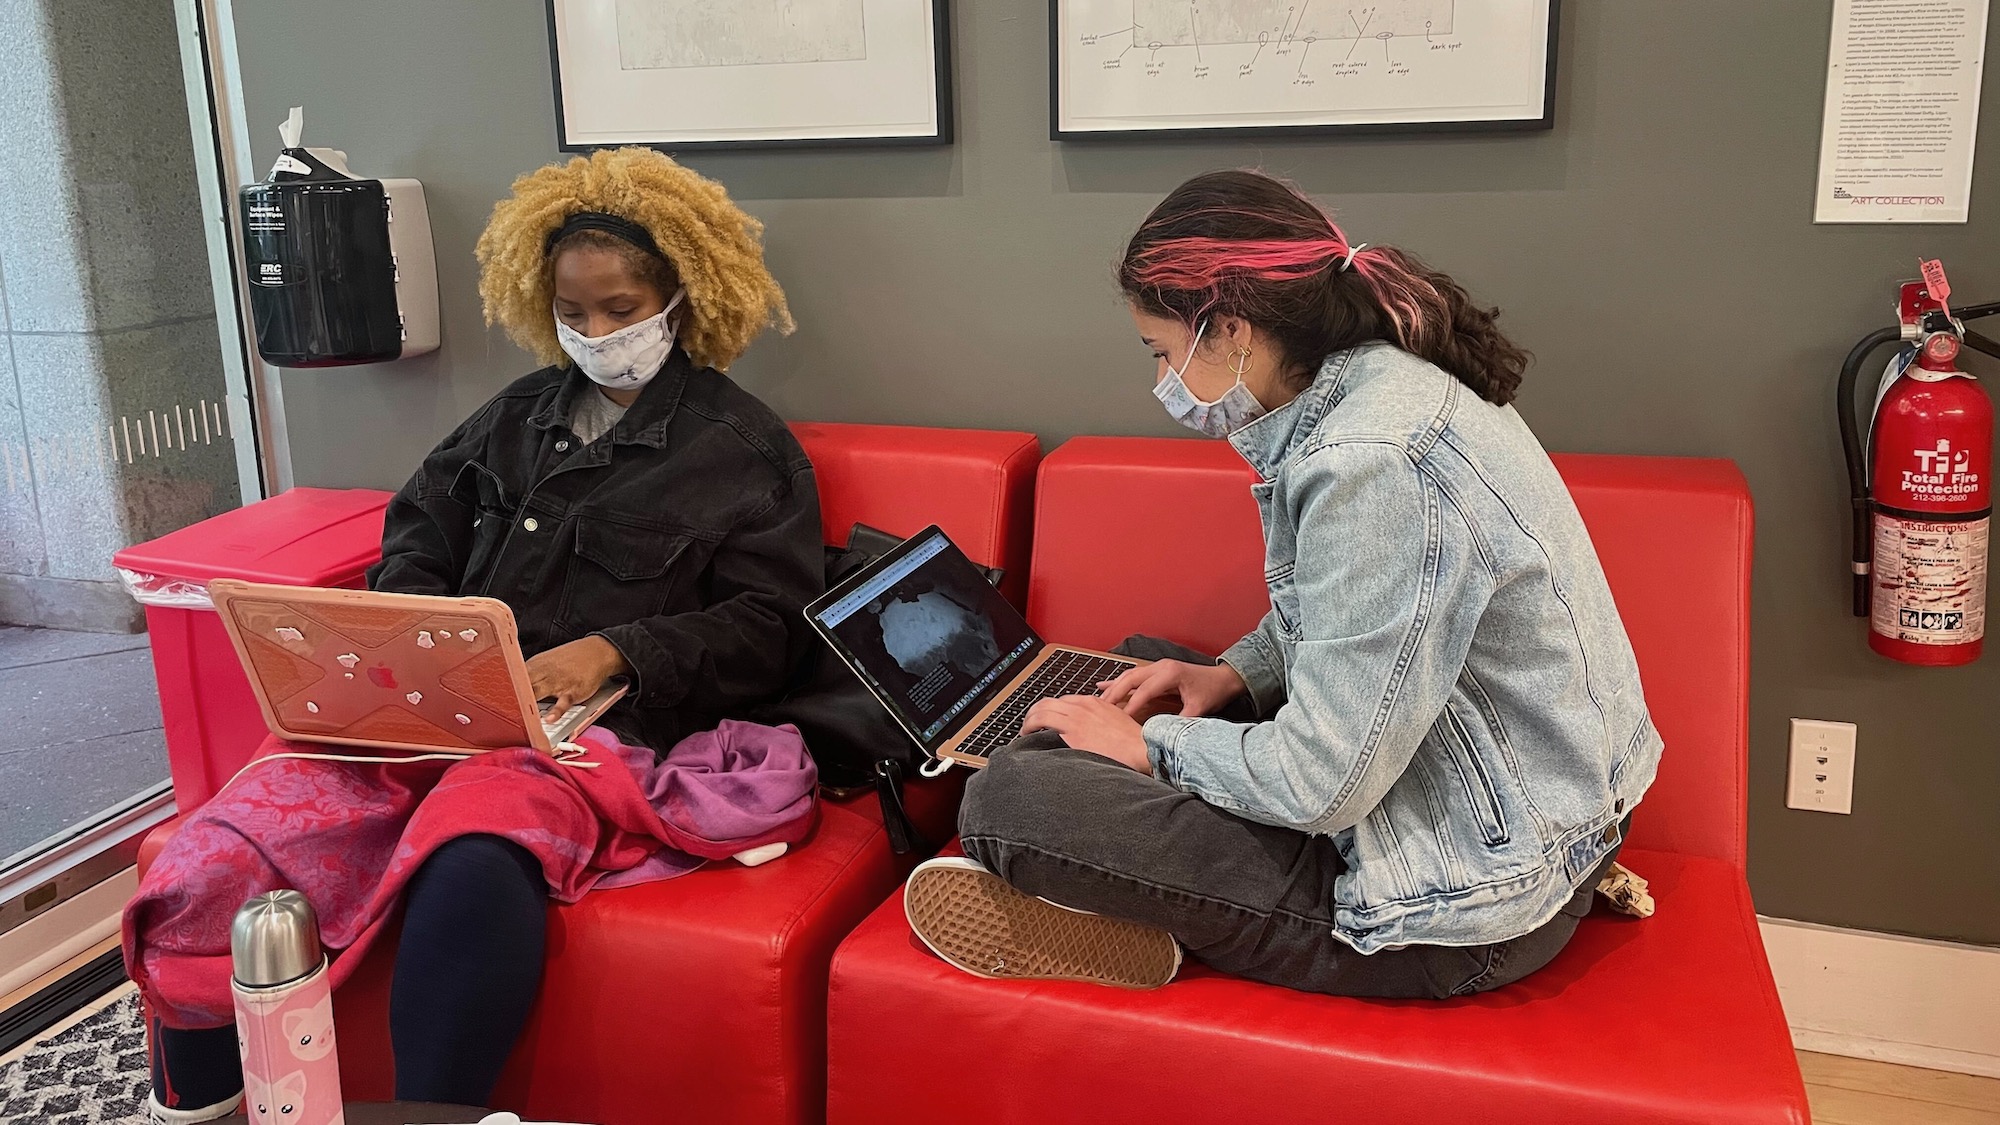 Students wear masks as they sit on couches and work on their laptops